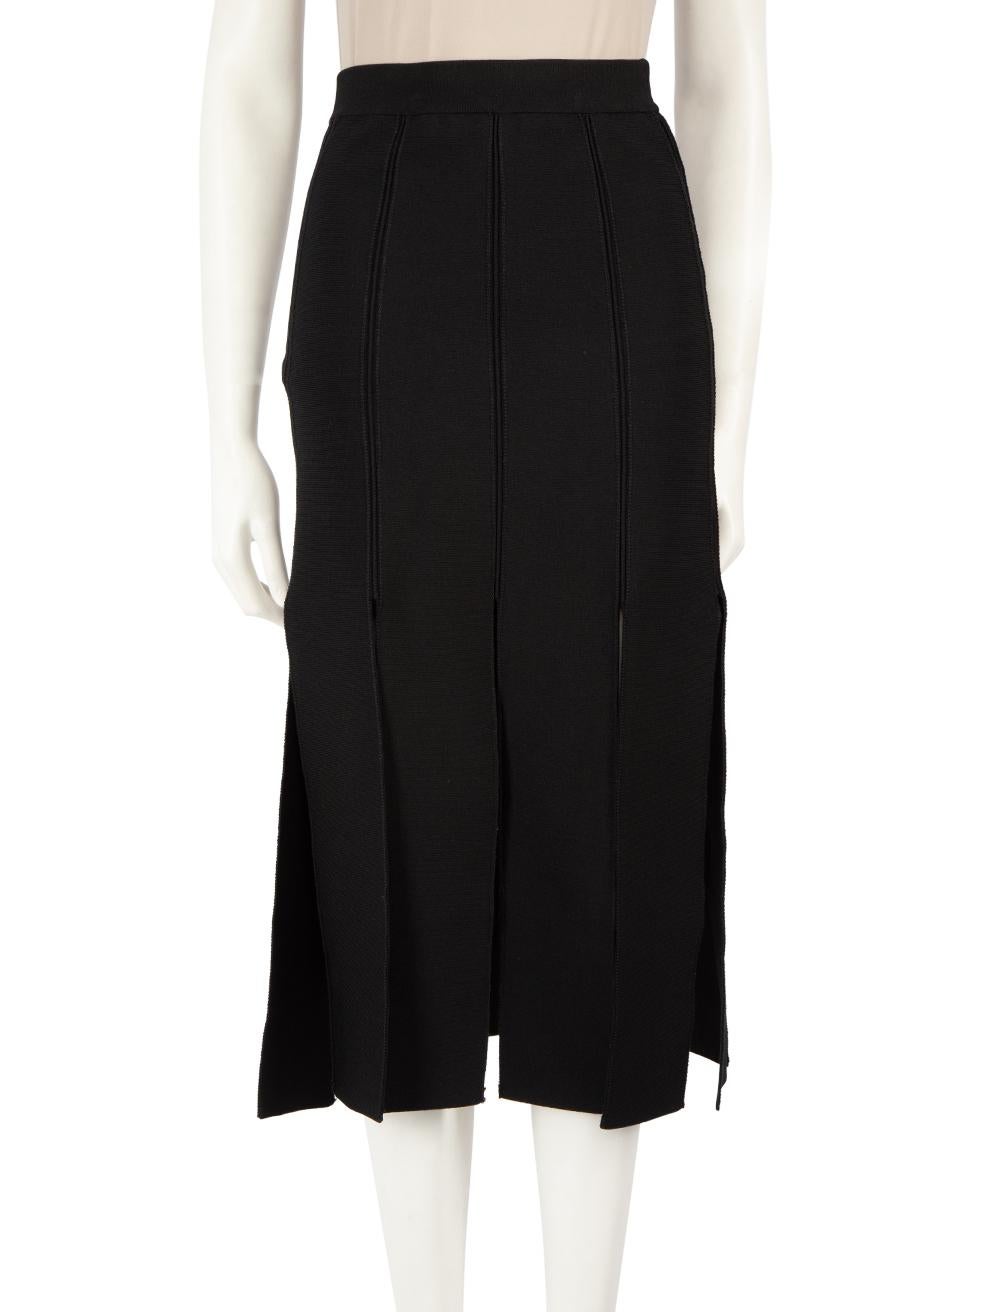 CONDITION is Very good. Hardly any visible wear to the dress is evident on this used Sandro designer resale item.
 
 
 
 Details
 
 
 Black
 
 Viscose
 
 Skirt
 
 Elasticated waistband
 
 Fringe hem
 
 Midi
 
 
 
 
 
 Made in China
 
 
 
